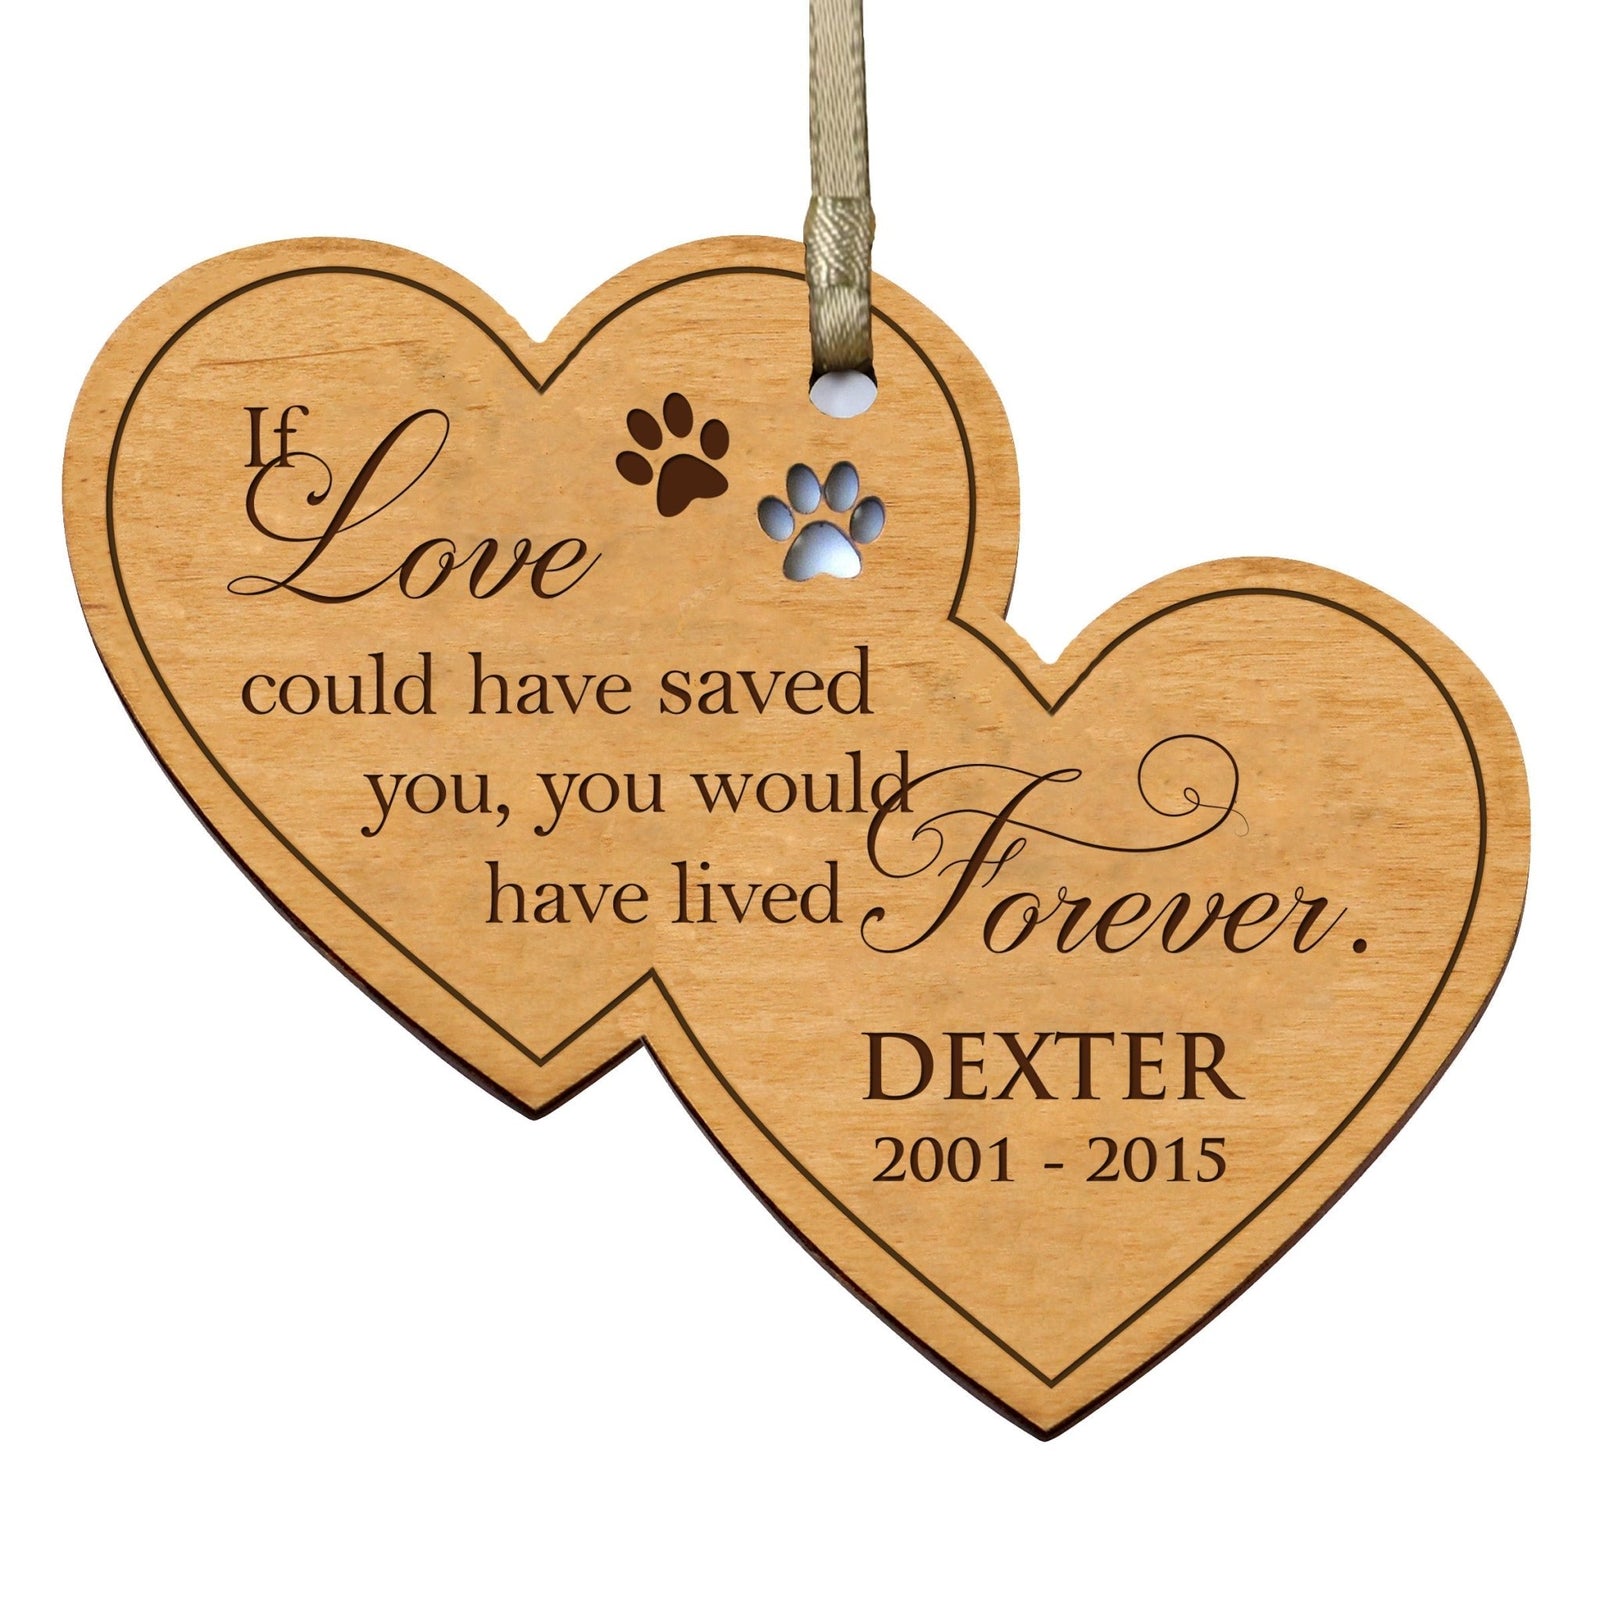 Pet Memorial Wooden Double Heart Ornament - If Love Could Have Saved You - LifeSong Milestones